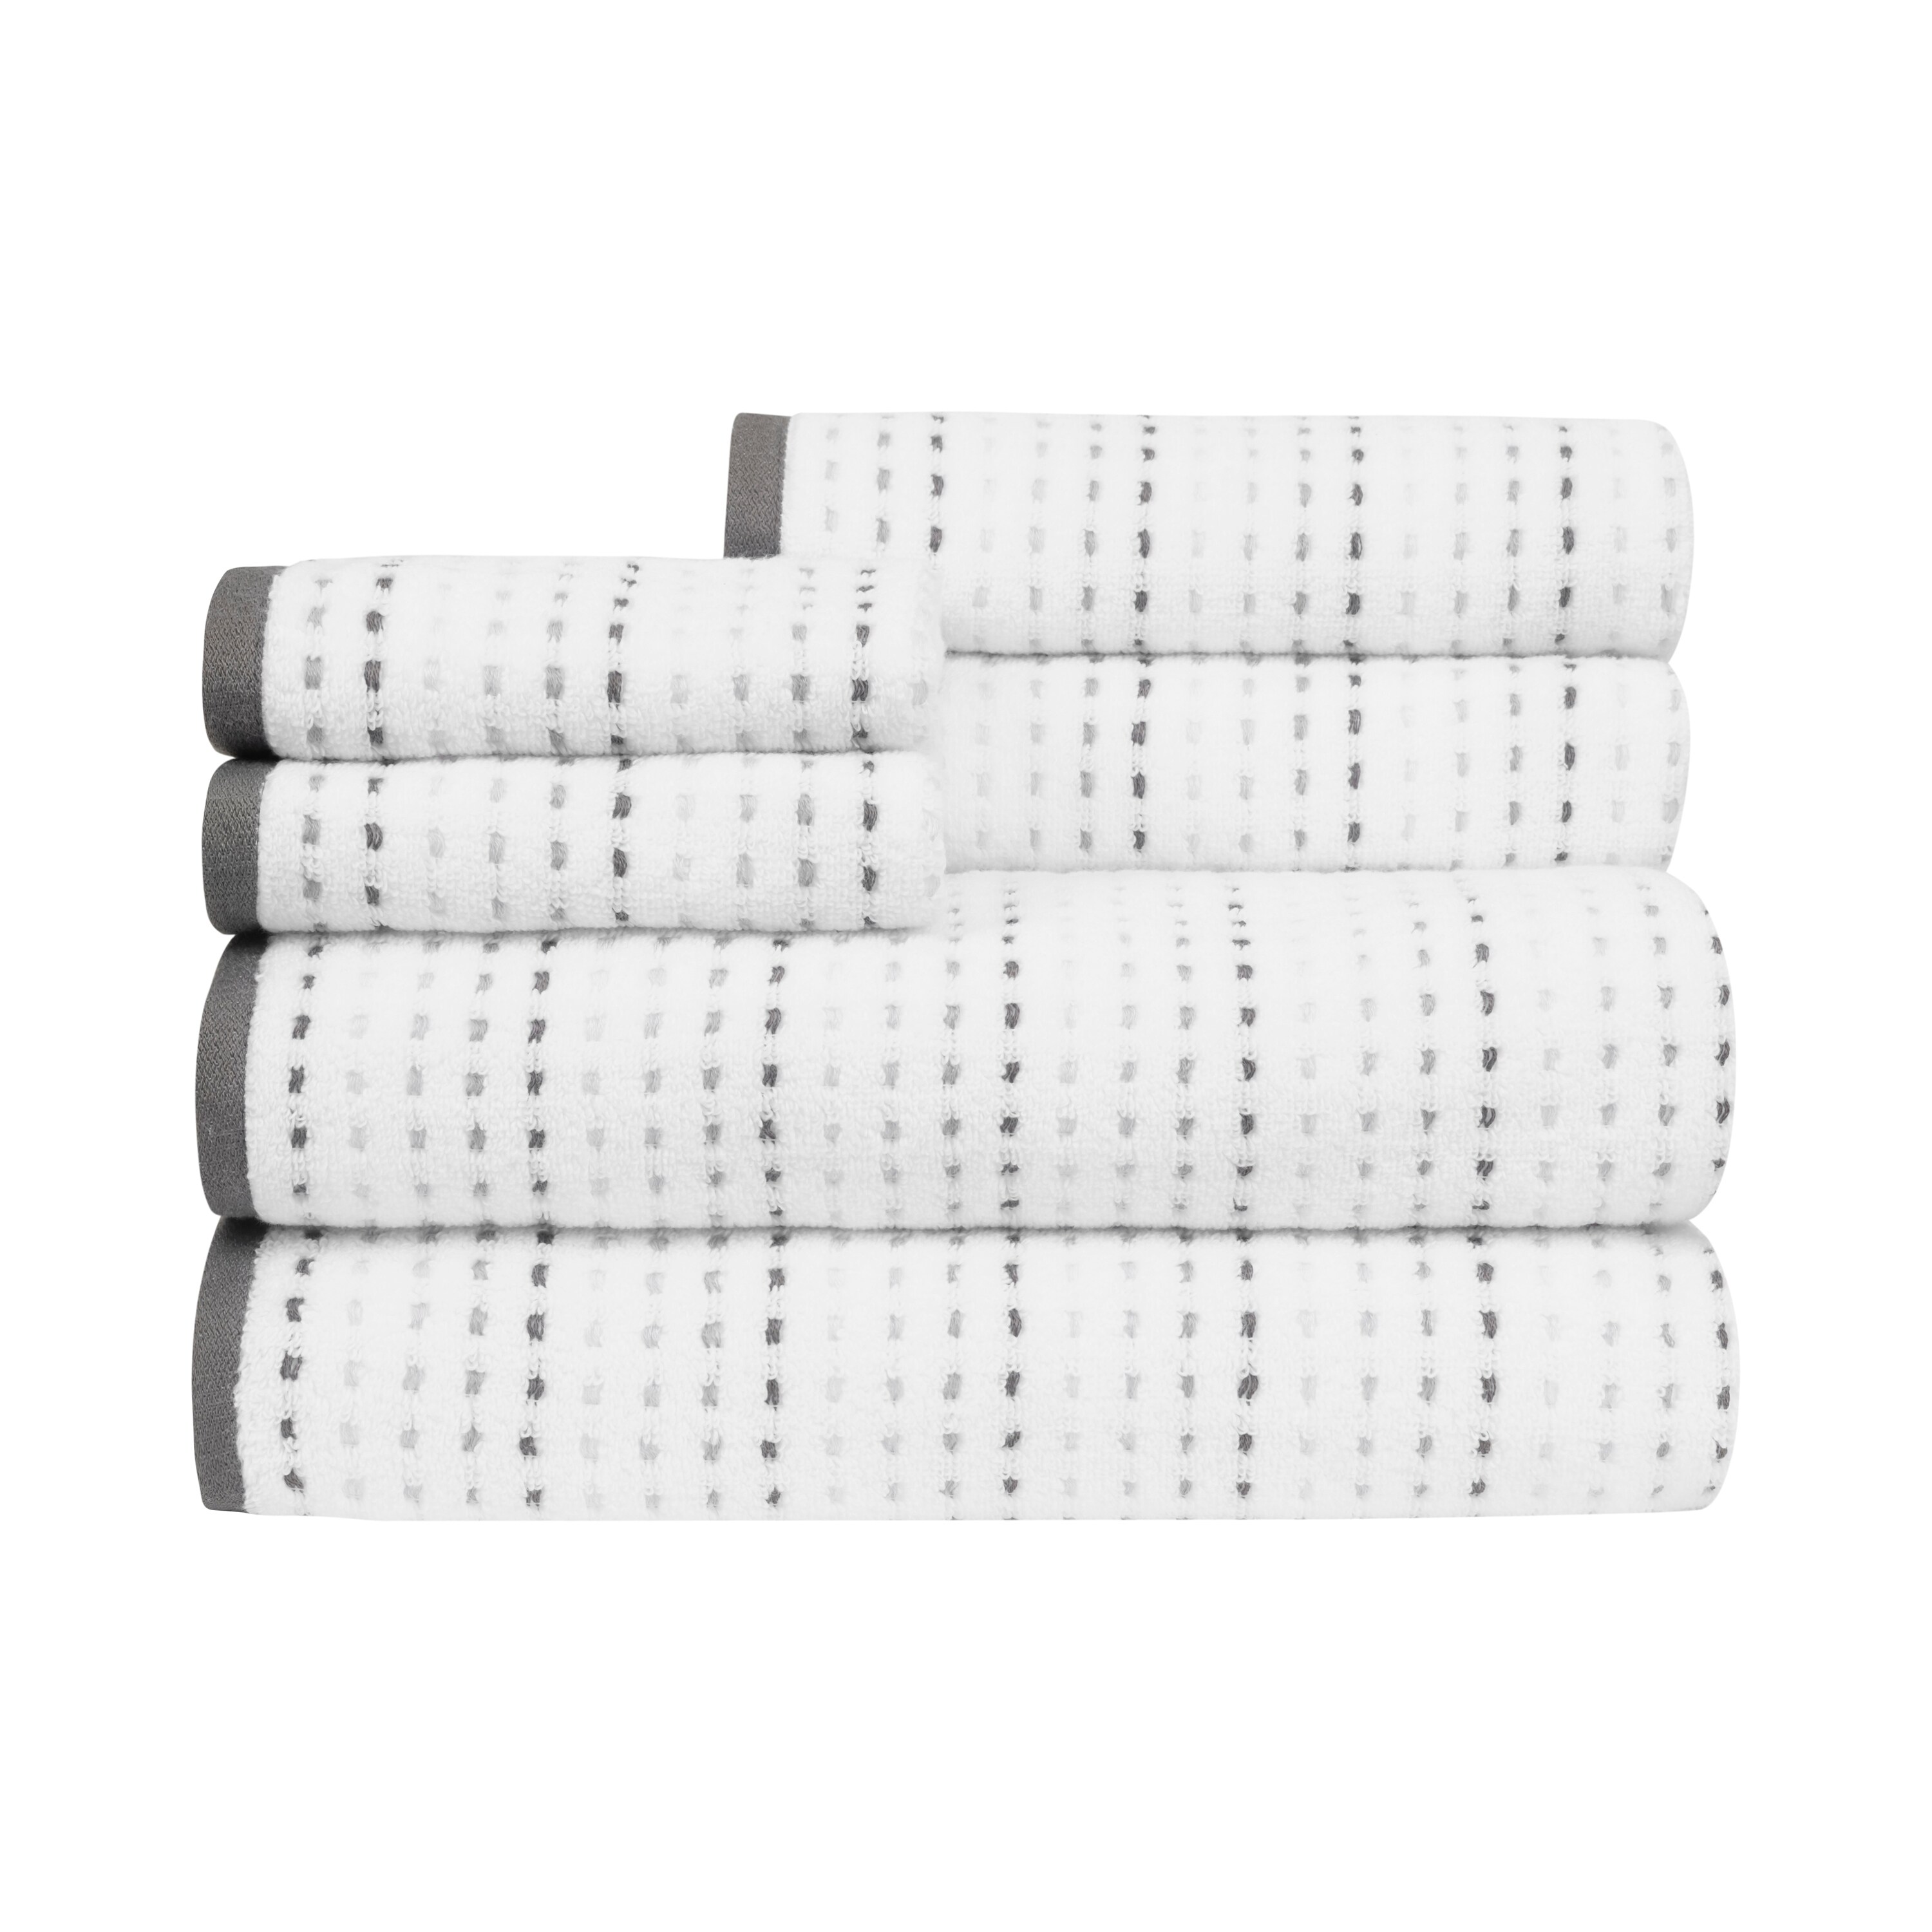 https://ak1.ostkcdn.com/images/products/is/images/direct/ee7324ede8aad6abe54c3c1edd62a6aef38896ba/Caro-Home-6-Piece-Parsnip-Towel-Set.jpg